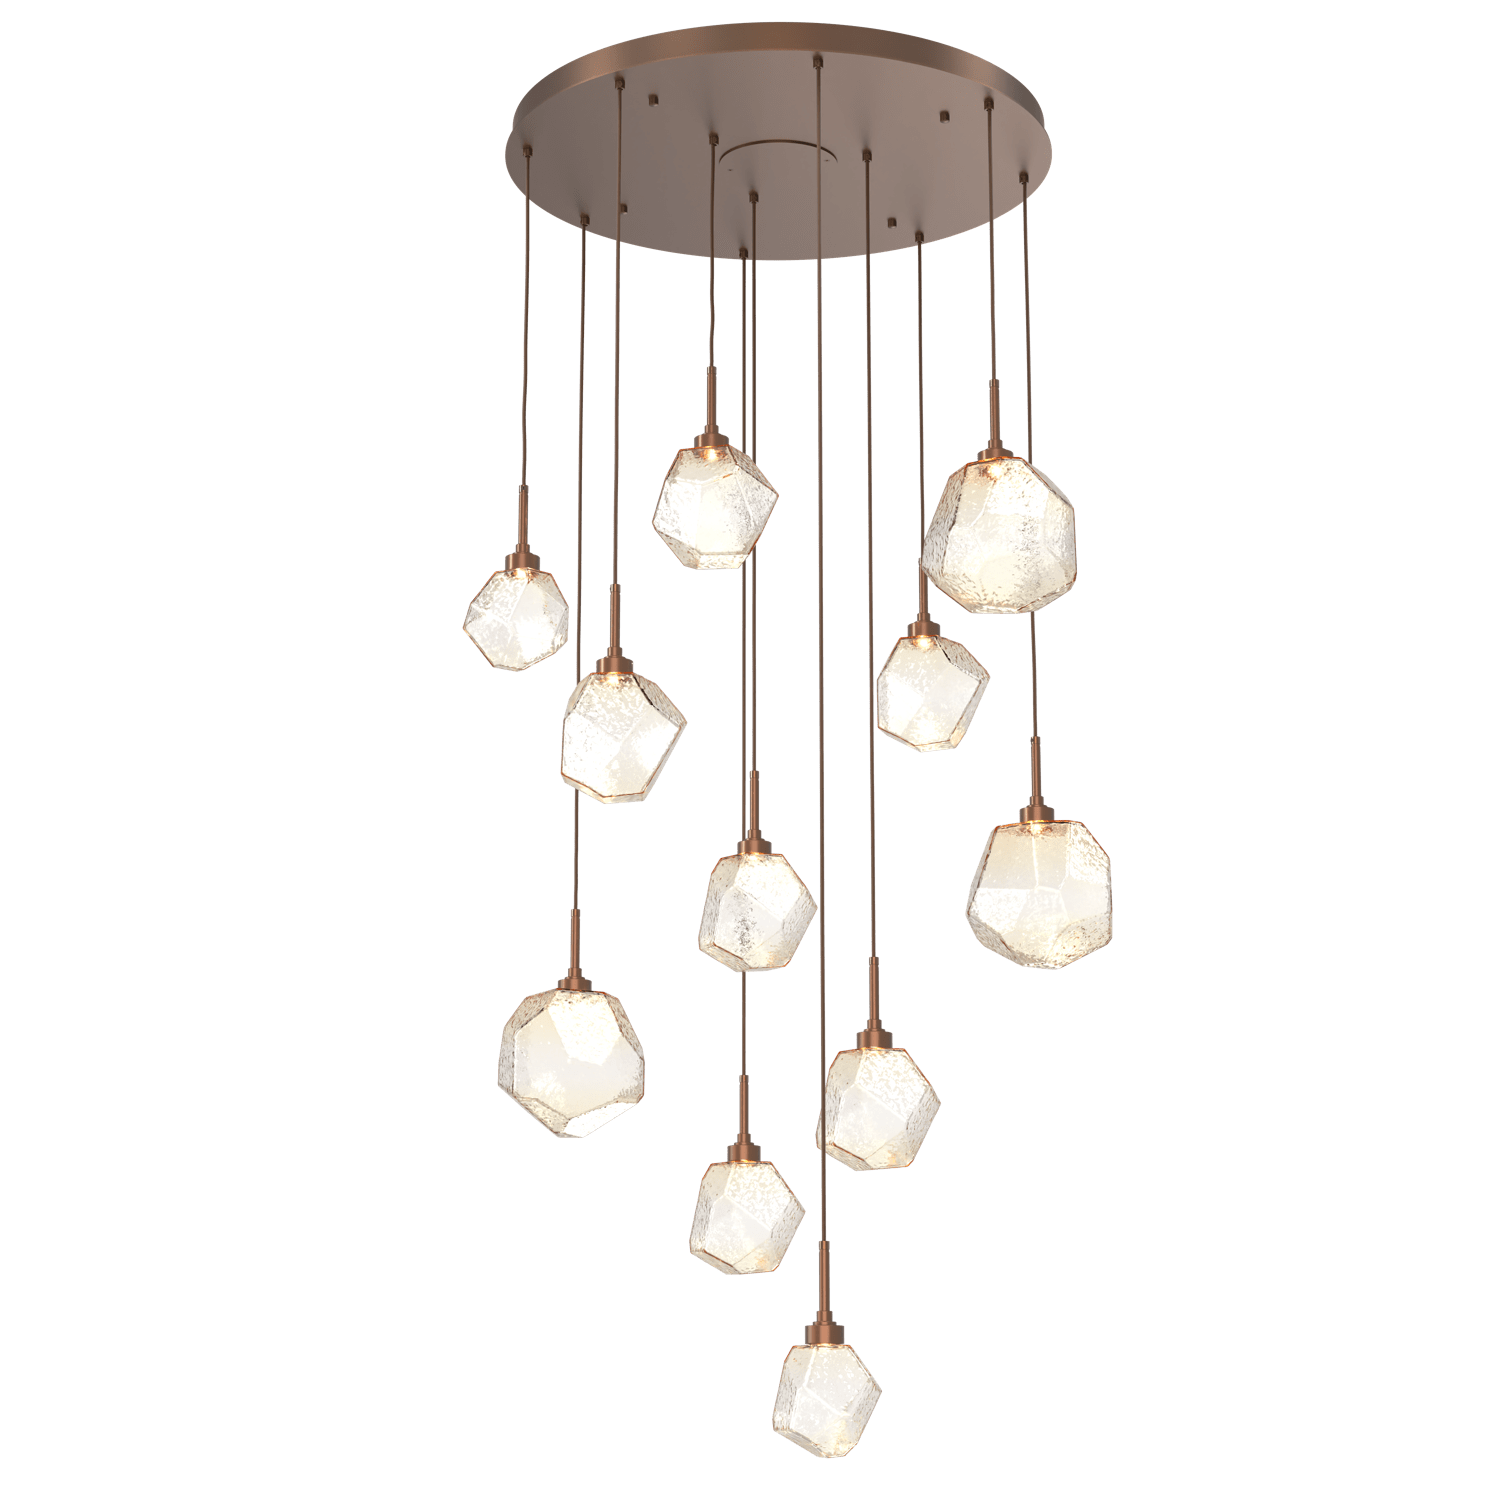 CHB0039-11-BB-A-Hammerton-Studio-Gem-11-light-round-pendant-chandelier-with-burnished-bronze-finish-and-amber-blown-glass-shades-and-LED-lamping